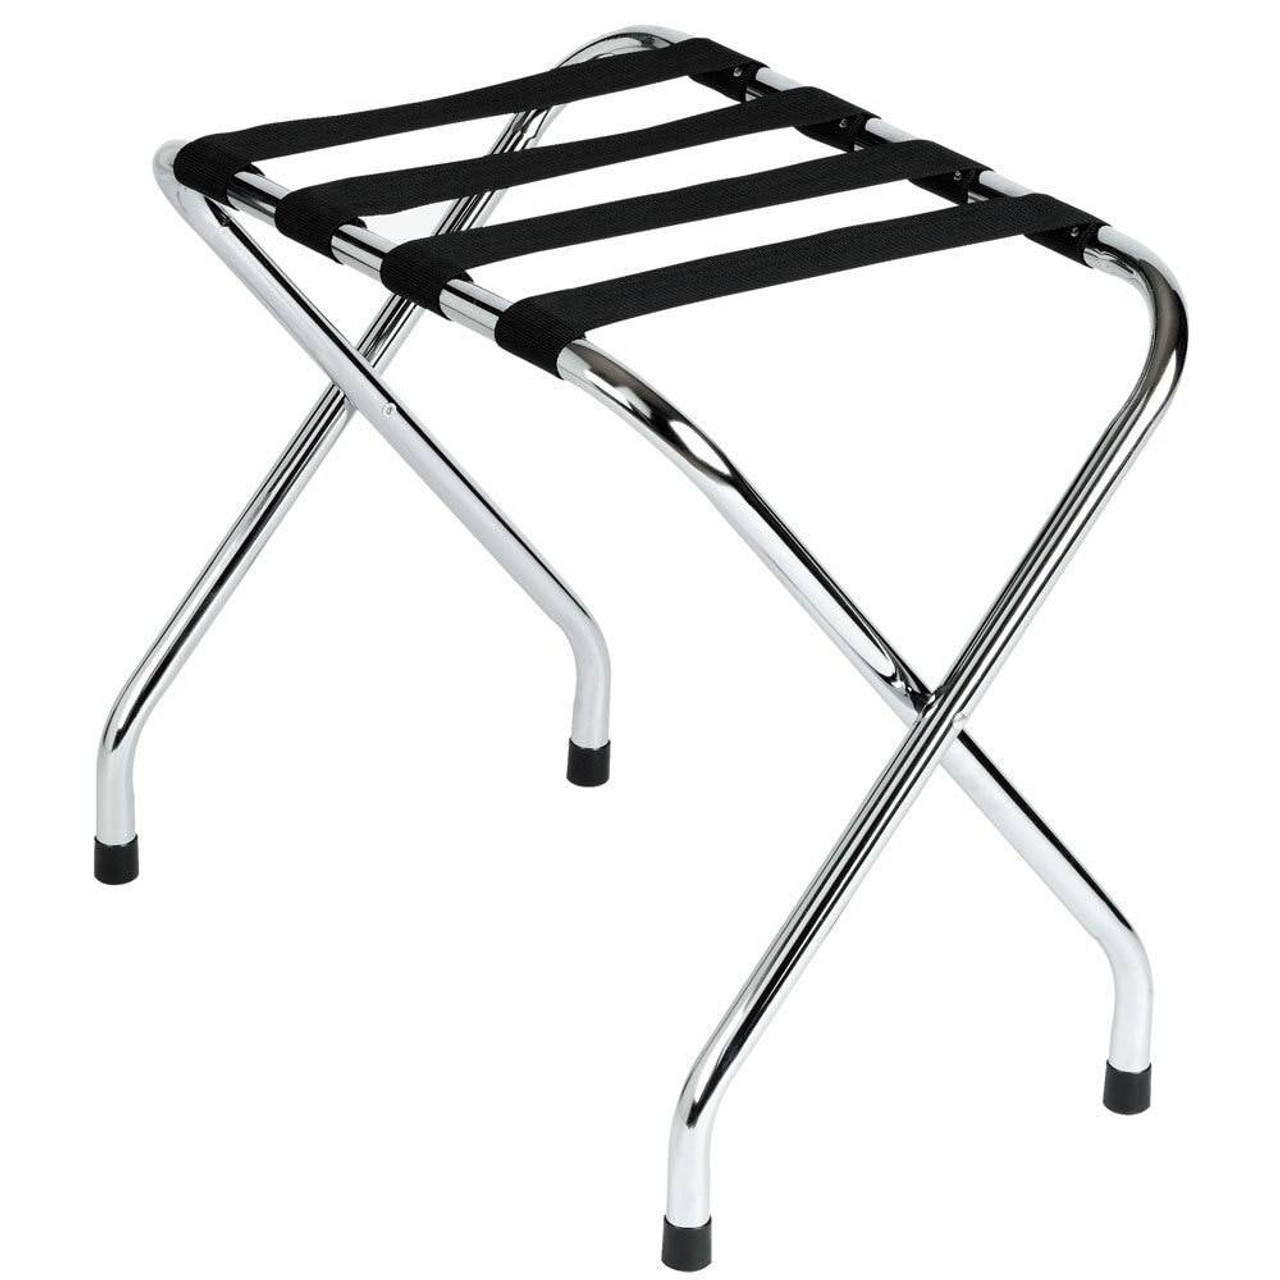 HOSPITALITY 1 SOURCE HOSPITALITY 1 SOURCE or CHROME FINISH LUGGAGE RACK or BLACK STRAPS or 4 PER CASE